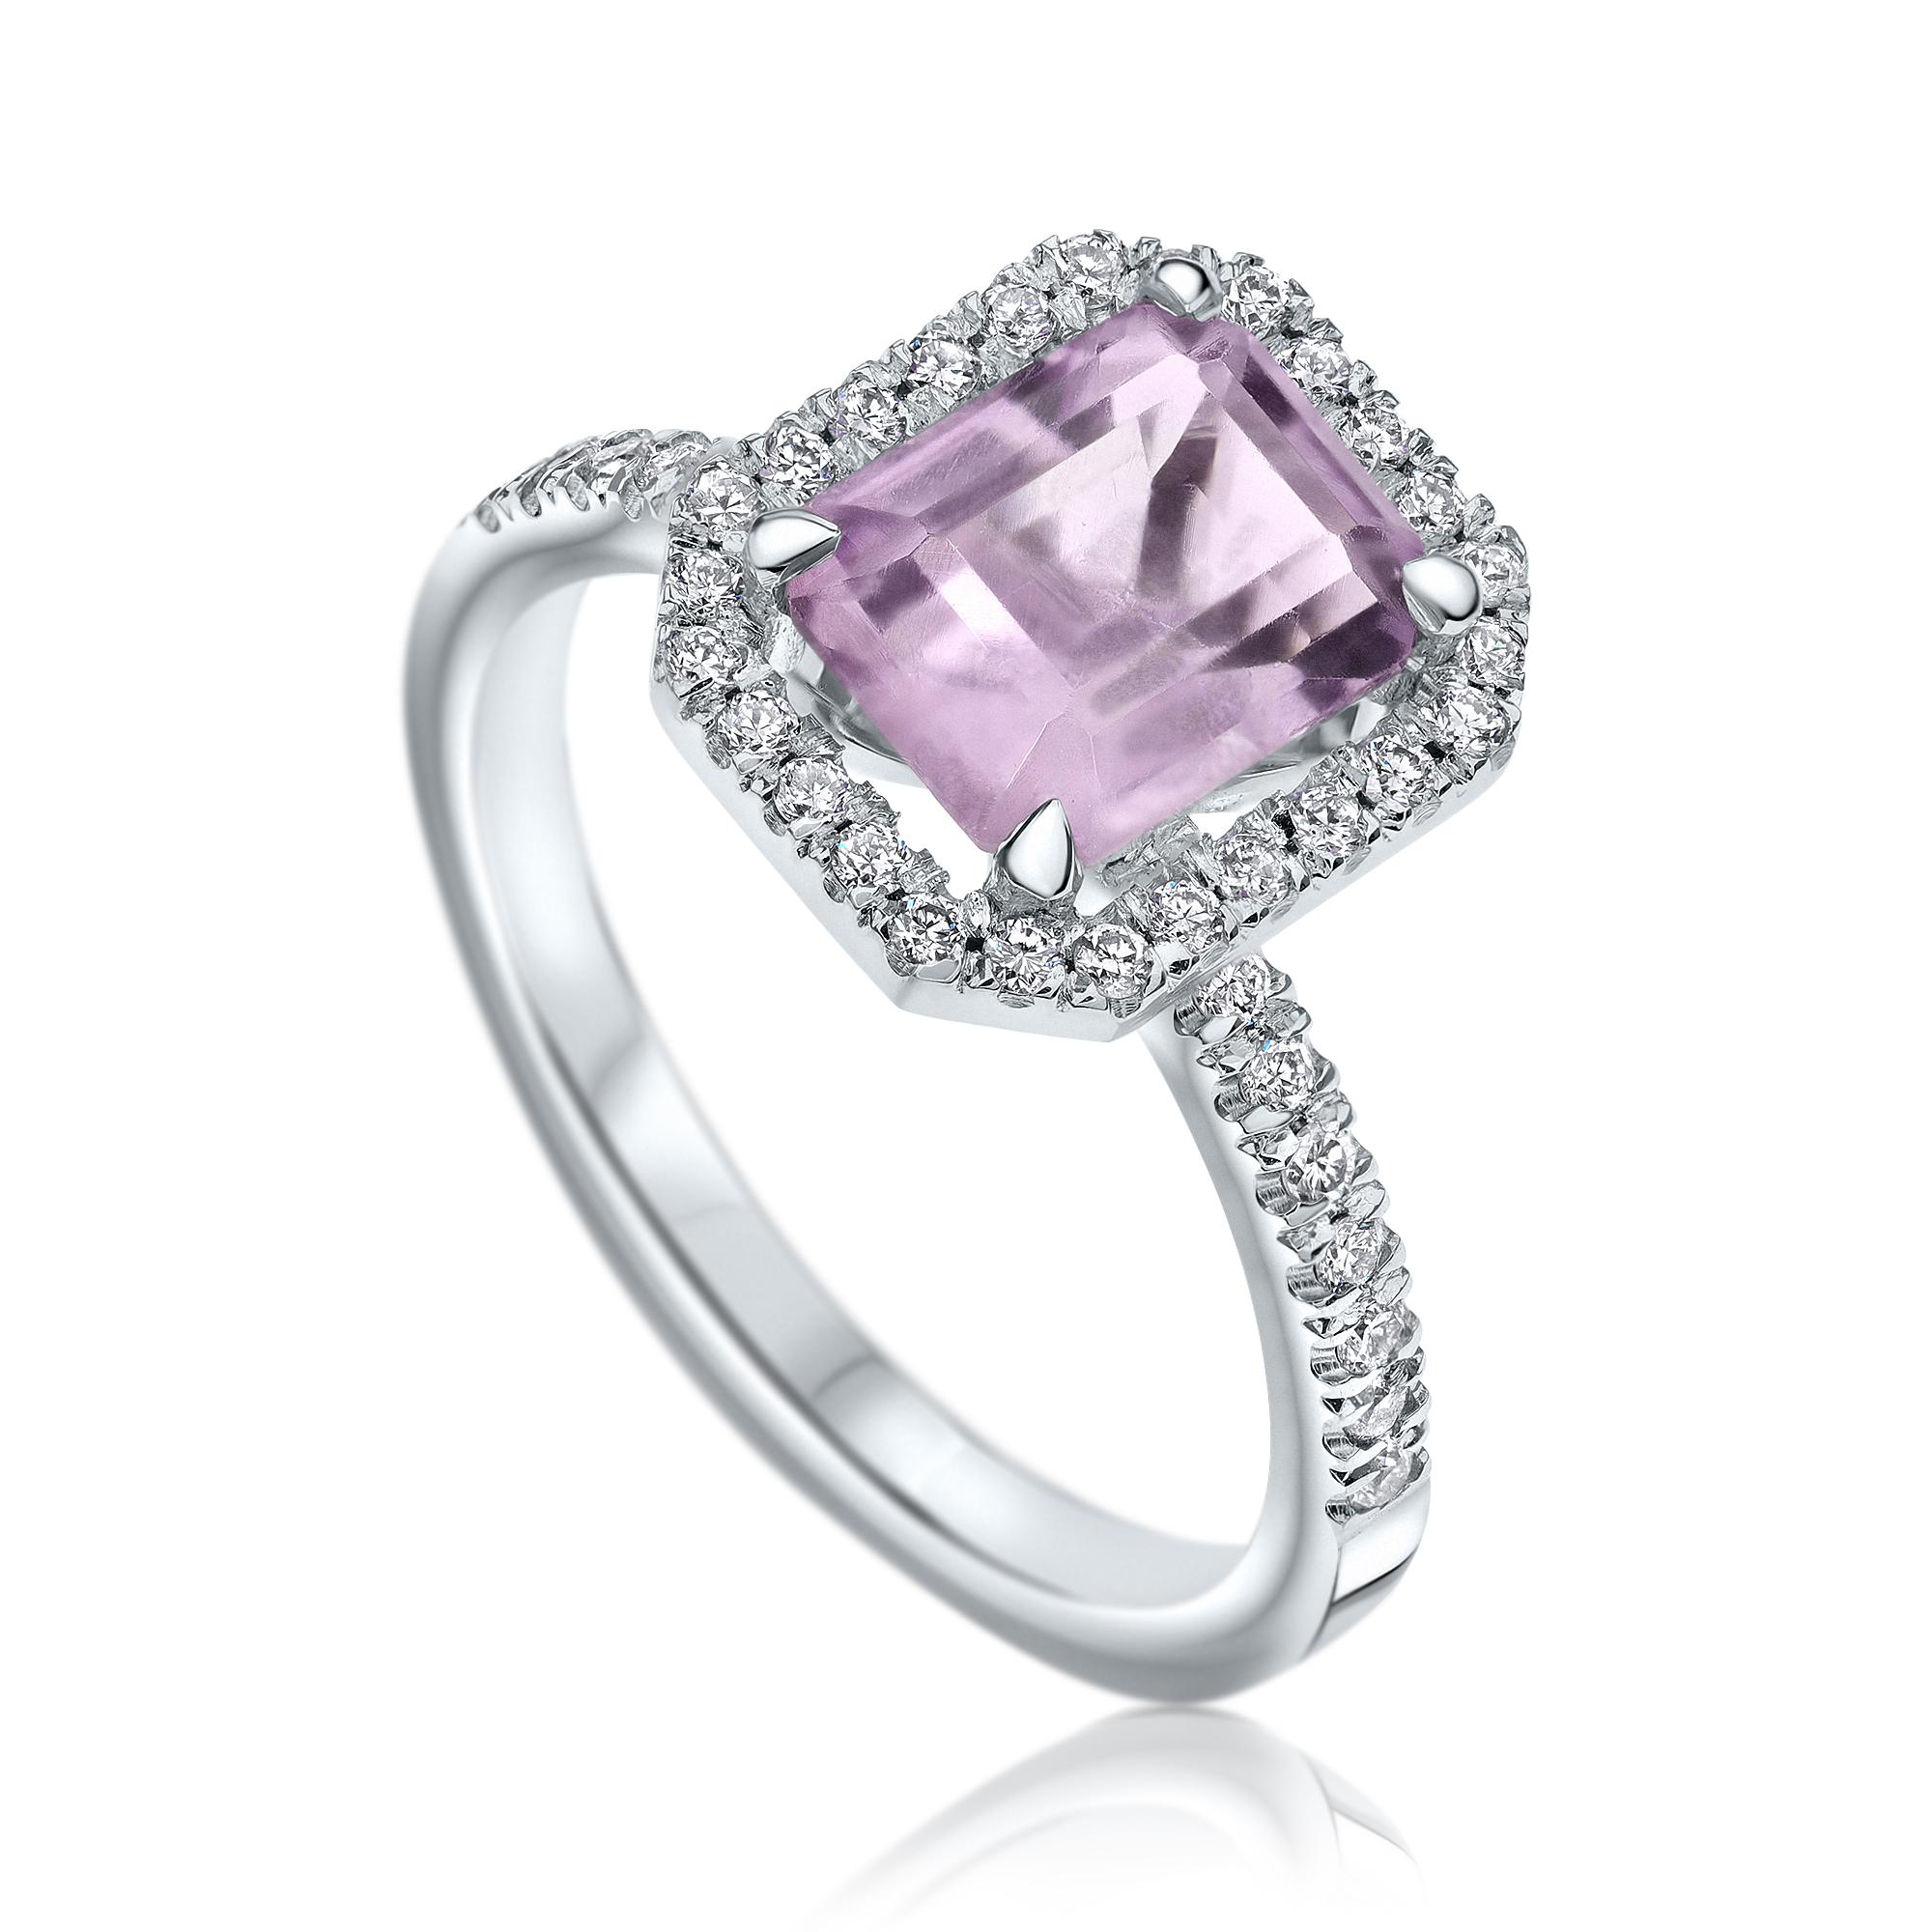 1.65 Carat Emerald Cut Amethyst Gem Stone & Diamonds Ring in 14K White Gold - Gem Glam Collection

Emerald shaped Amethyst gemstone halo style diamond ring, set with a purplish clear 1.65 CARAT natural Amethyst gemstone. 
In the ring there are